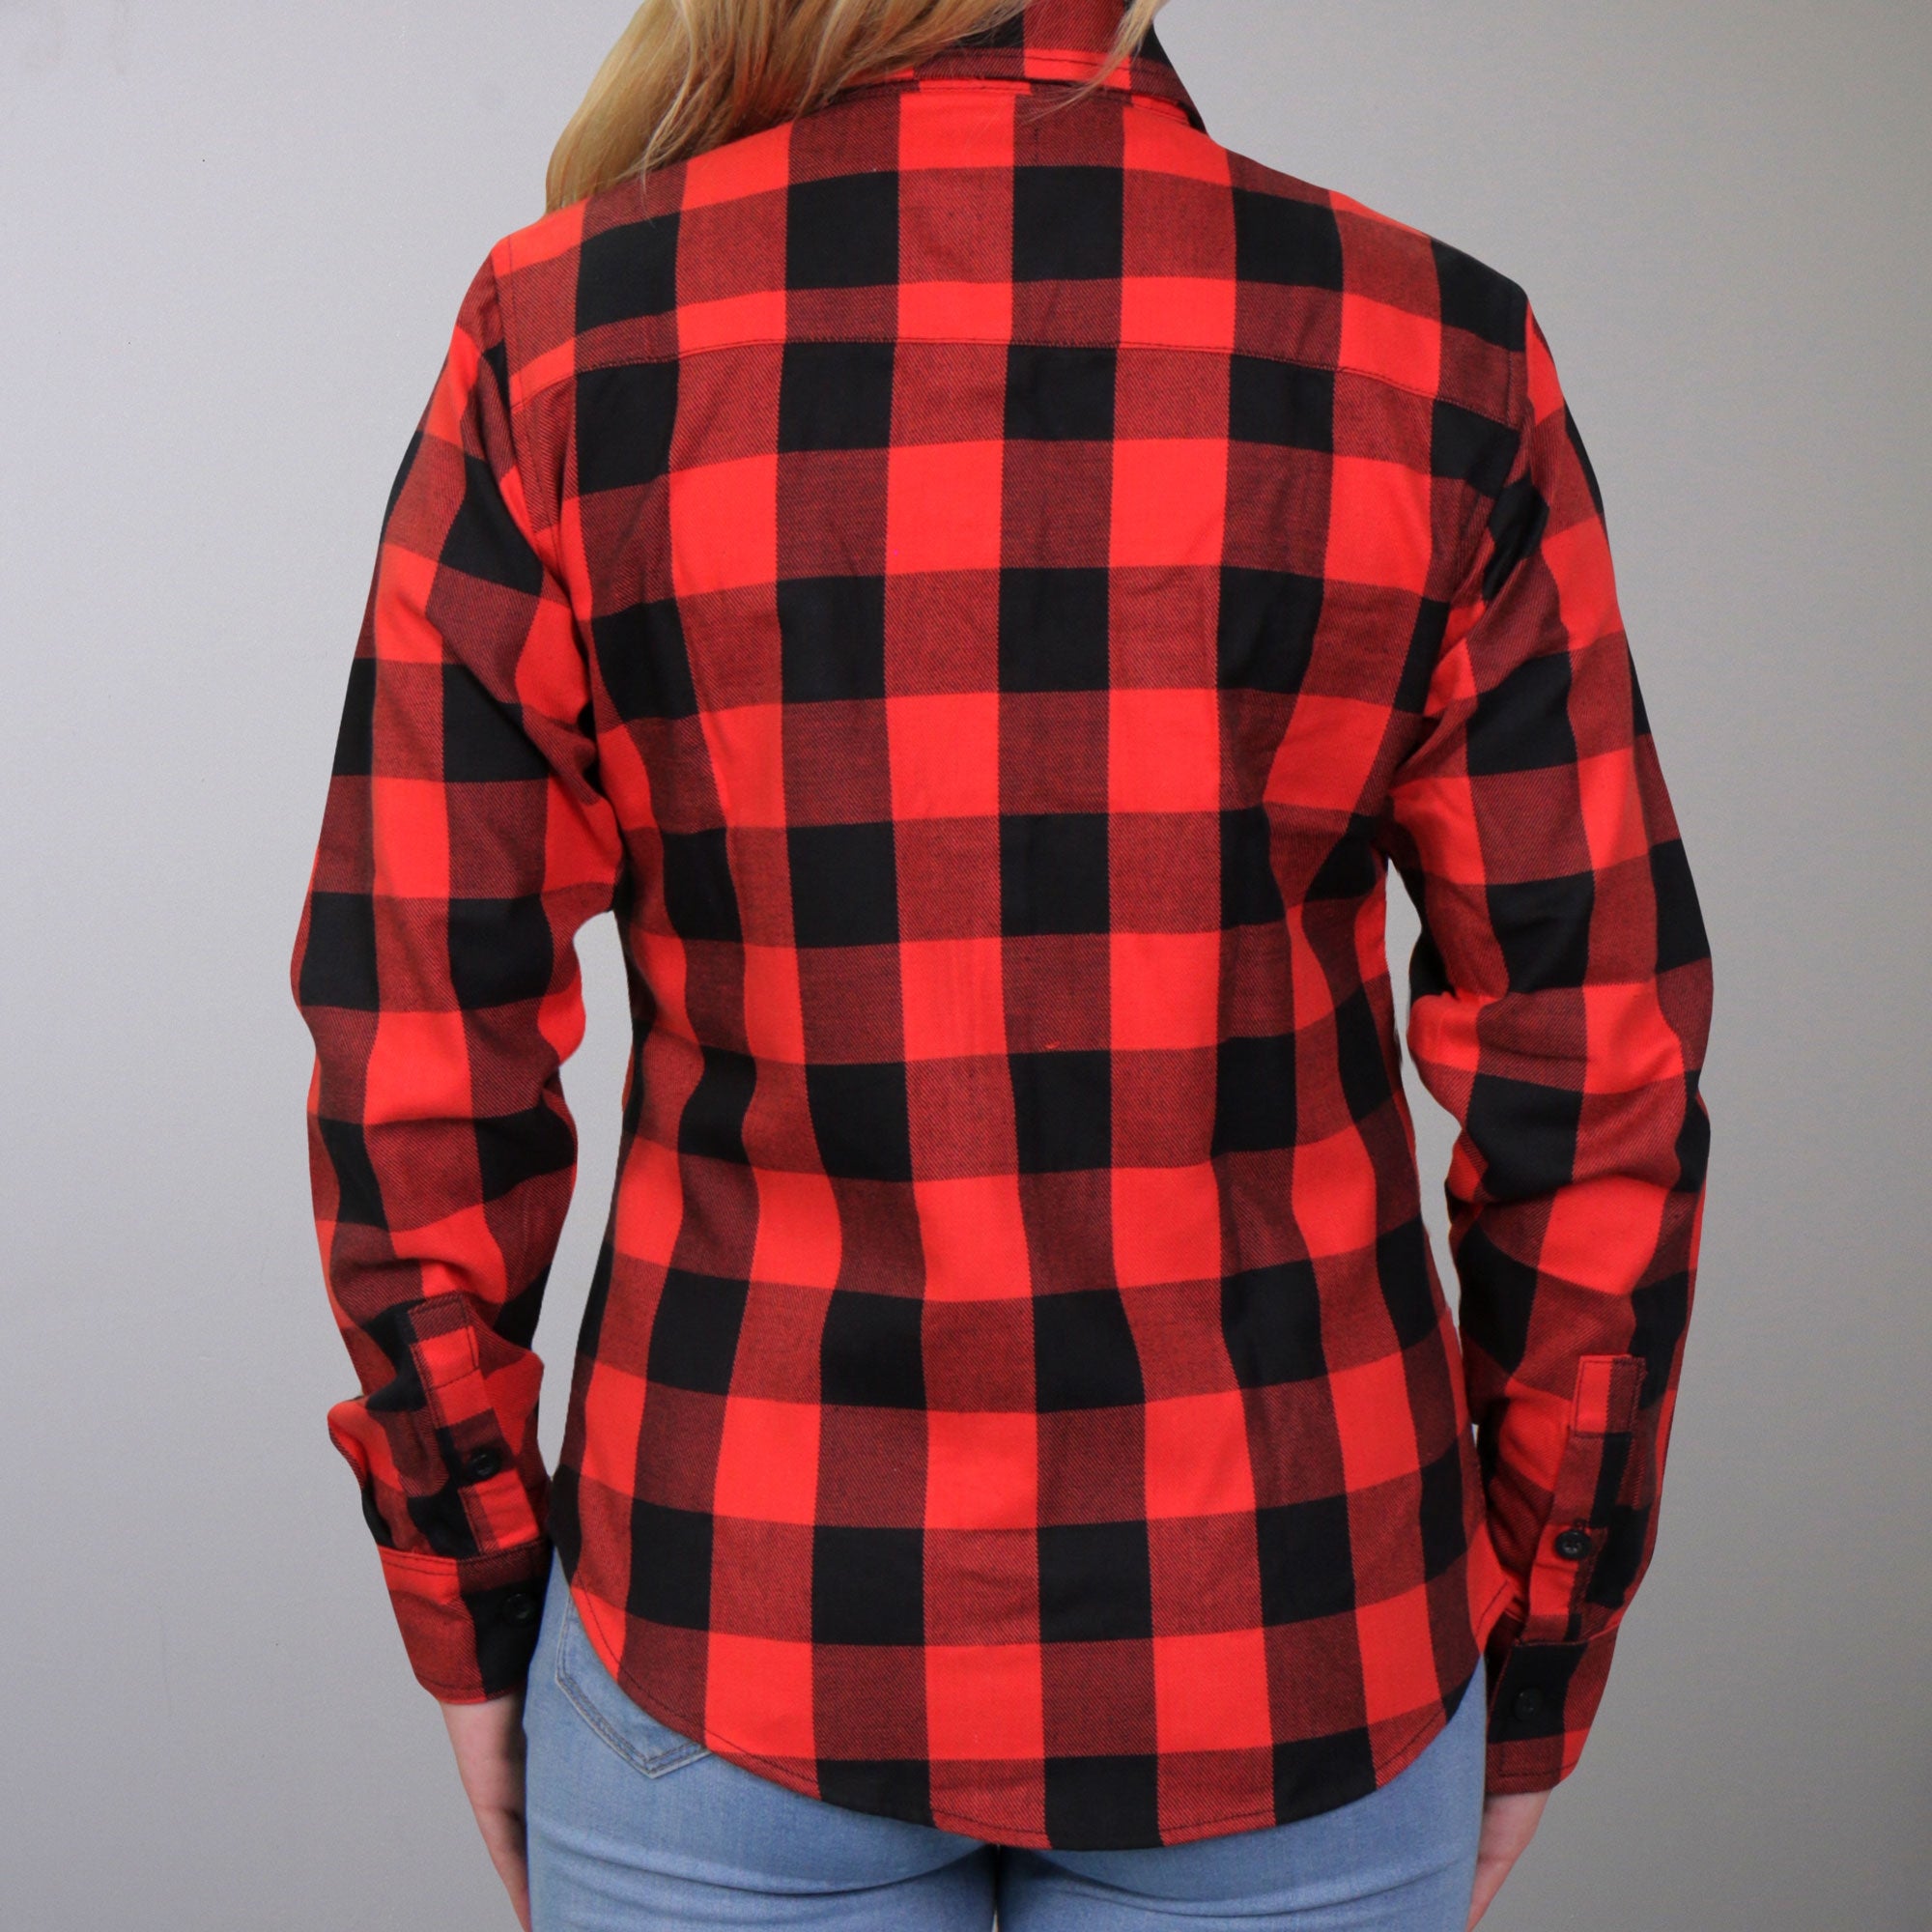 Hot Leathers FLL3002 Ladies Black and Red Long Sleeve Flannel